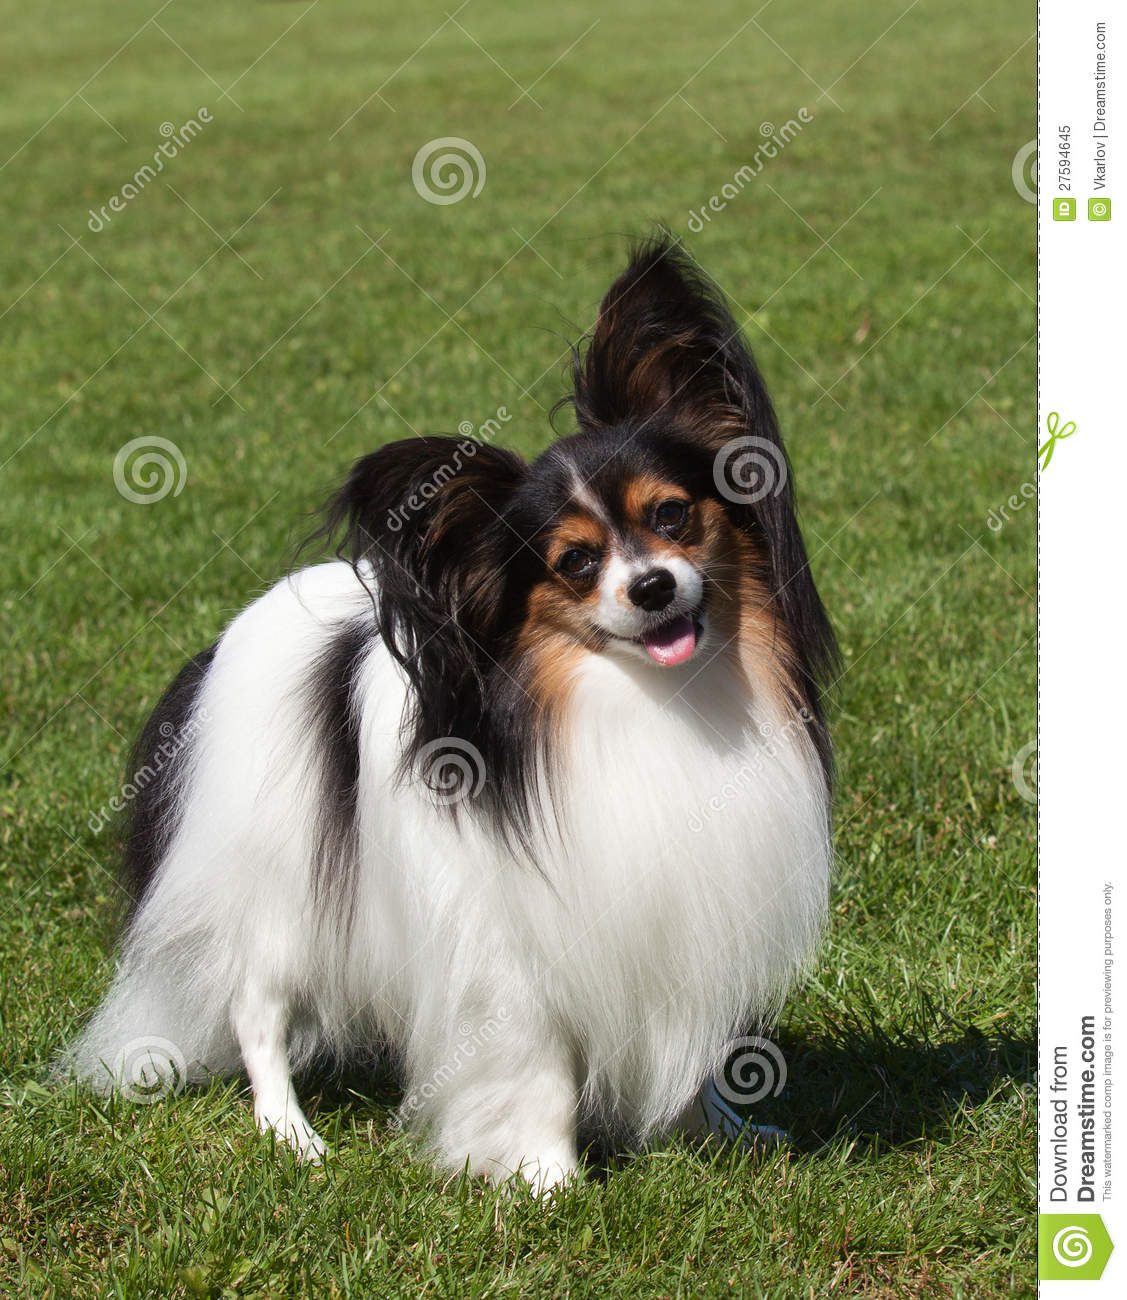 Beautiful Picture Of Papillon Dog